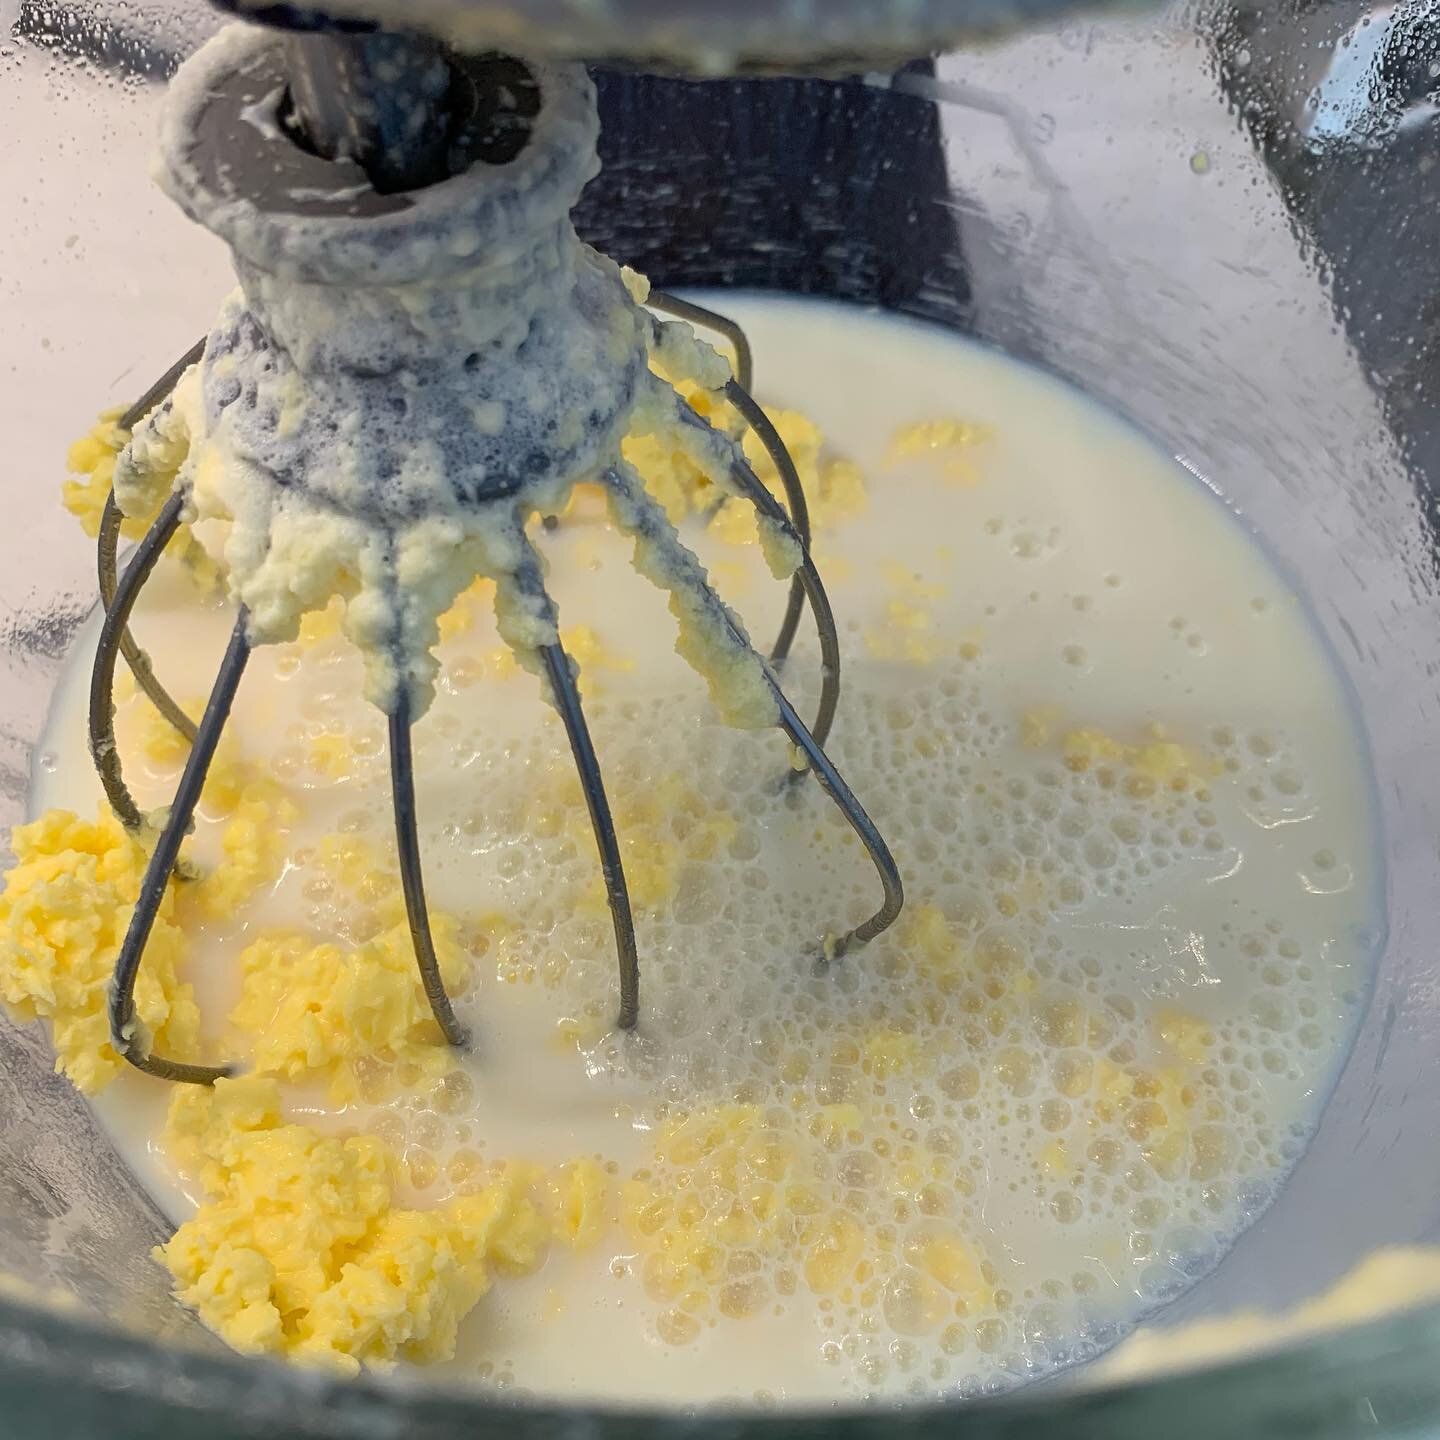 Fresh Butter for this mornings toast.  Take the cream from the milk and simply mix it in your kitchen aid mixer. In a short time, you&rsquo;ll have fresh butter. #jerseycows #freshbutter #rawmilk #a2